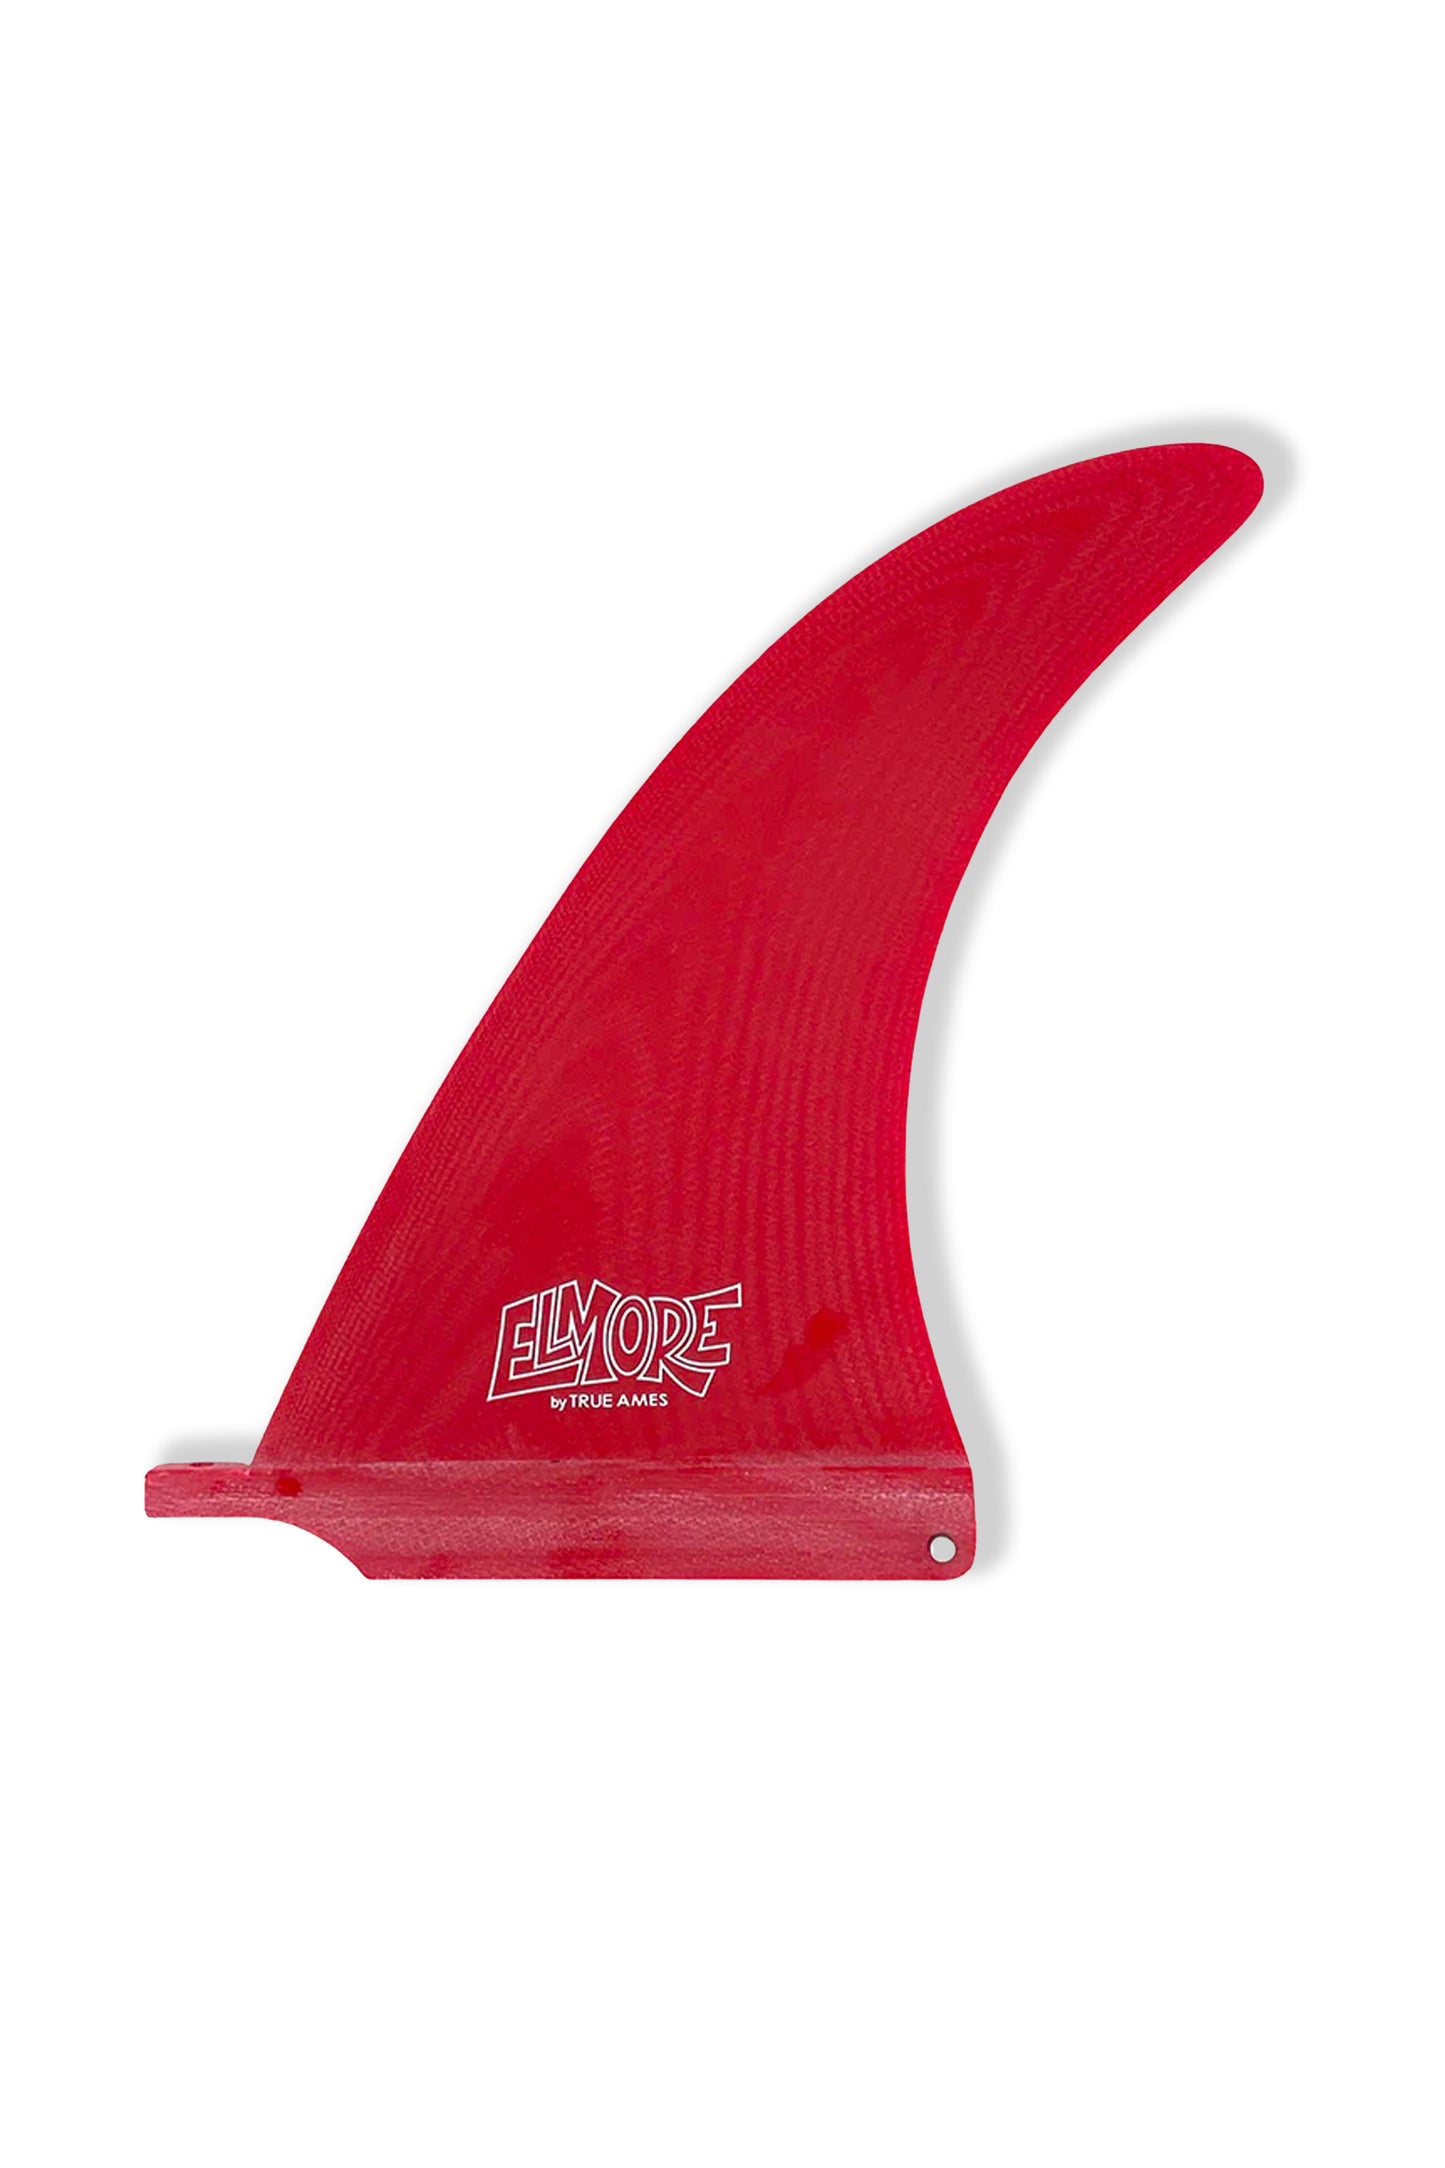 Pukas-Surf-Shop-true-ames-fin-troy-elmore-egg-fin-solid-red